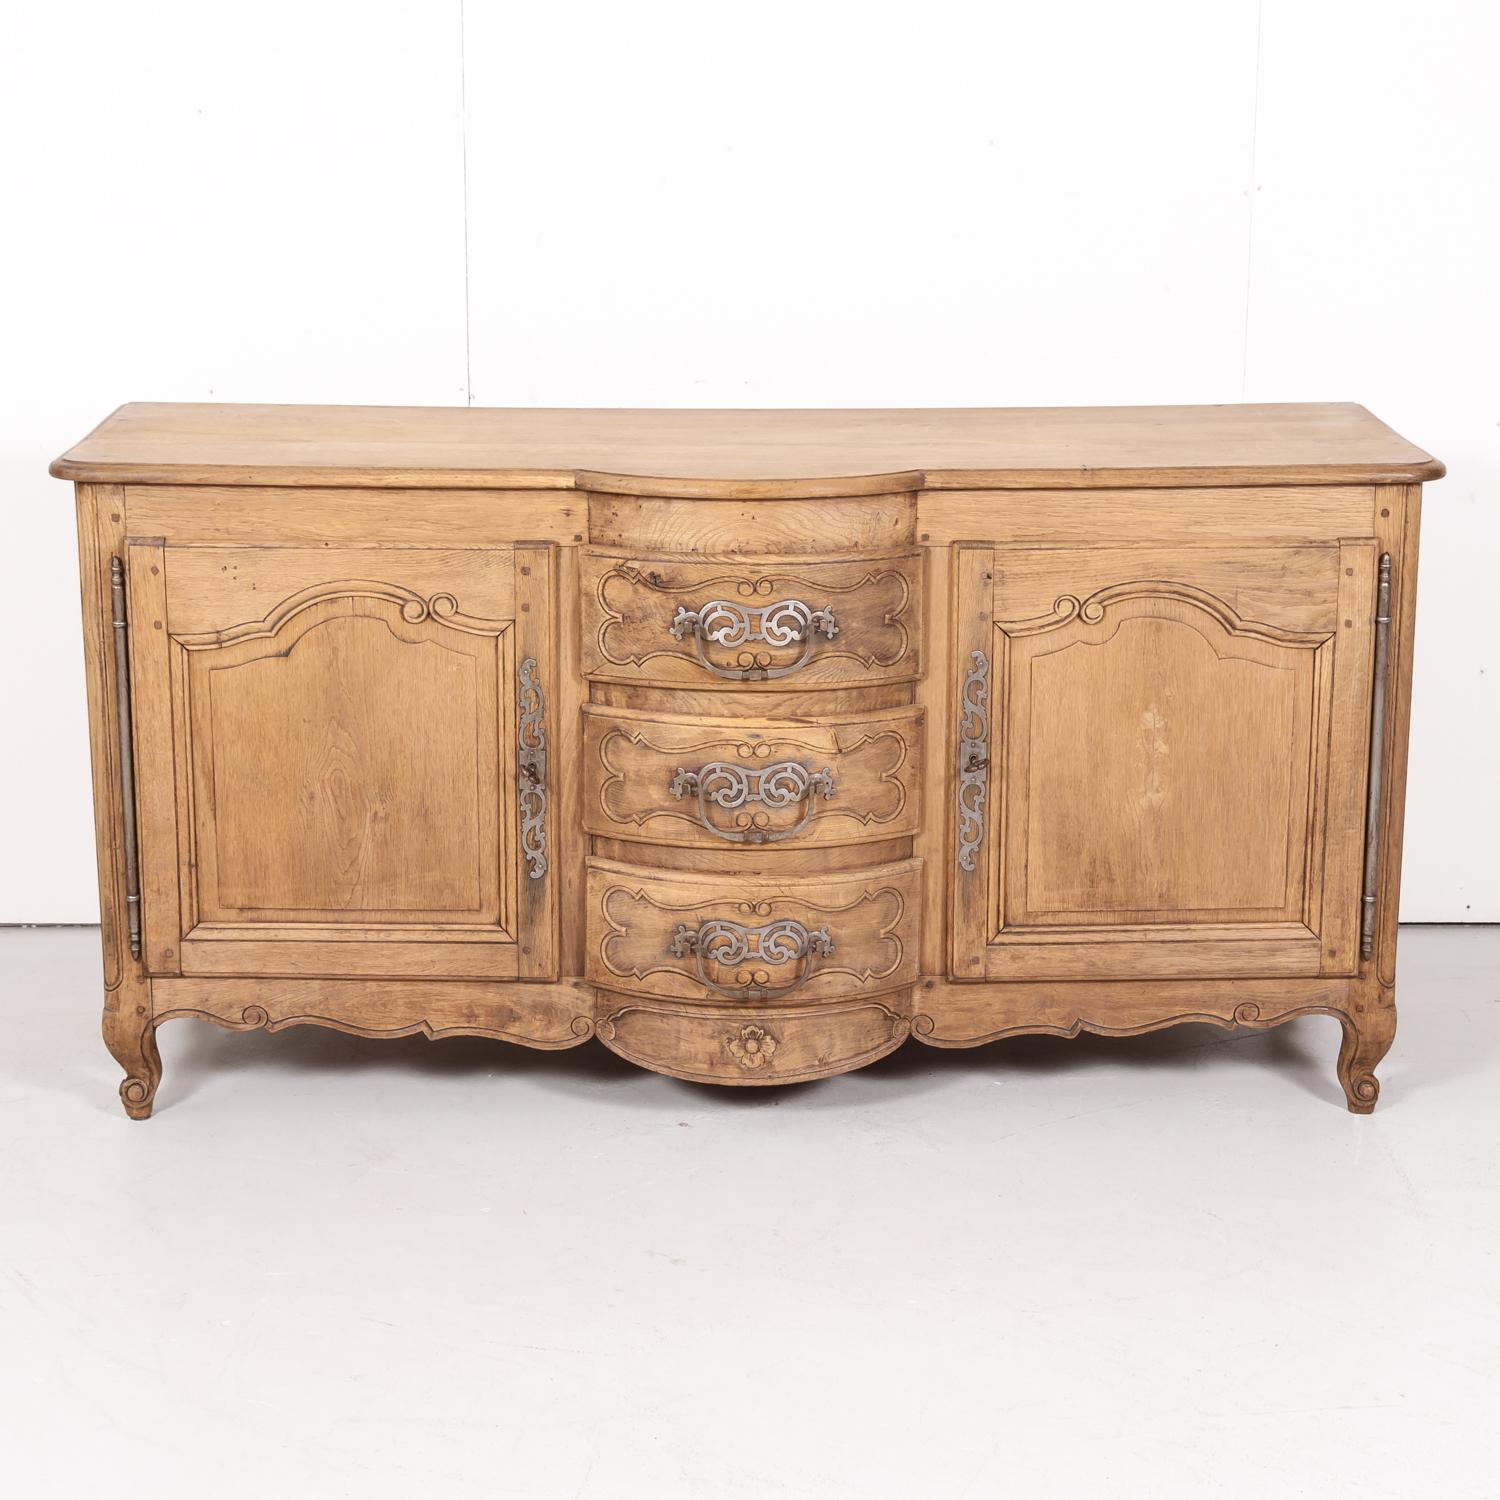 A beautiful antique French Country Louis XV style bleached oak bow front enfilade buffet from Bordeaux having a center tier of three drawers in a bow front shape stacked one upon the other flanked by carved panel doors that open to reveal a single